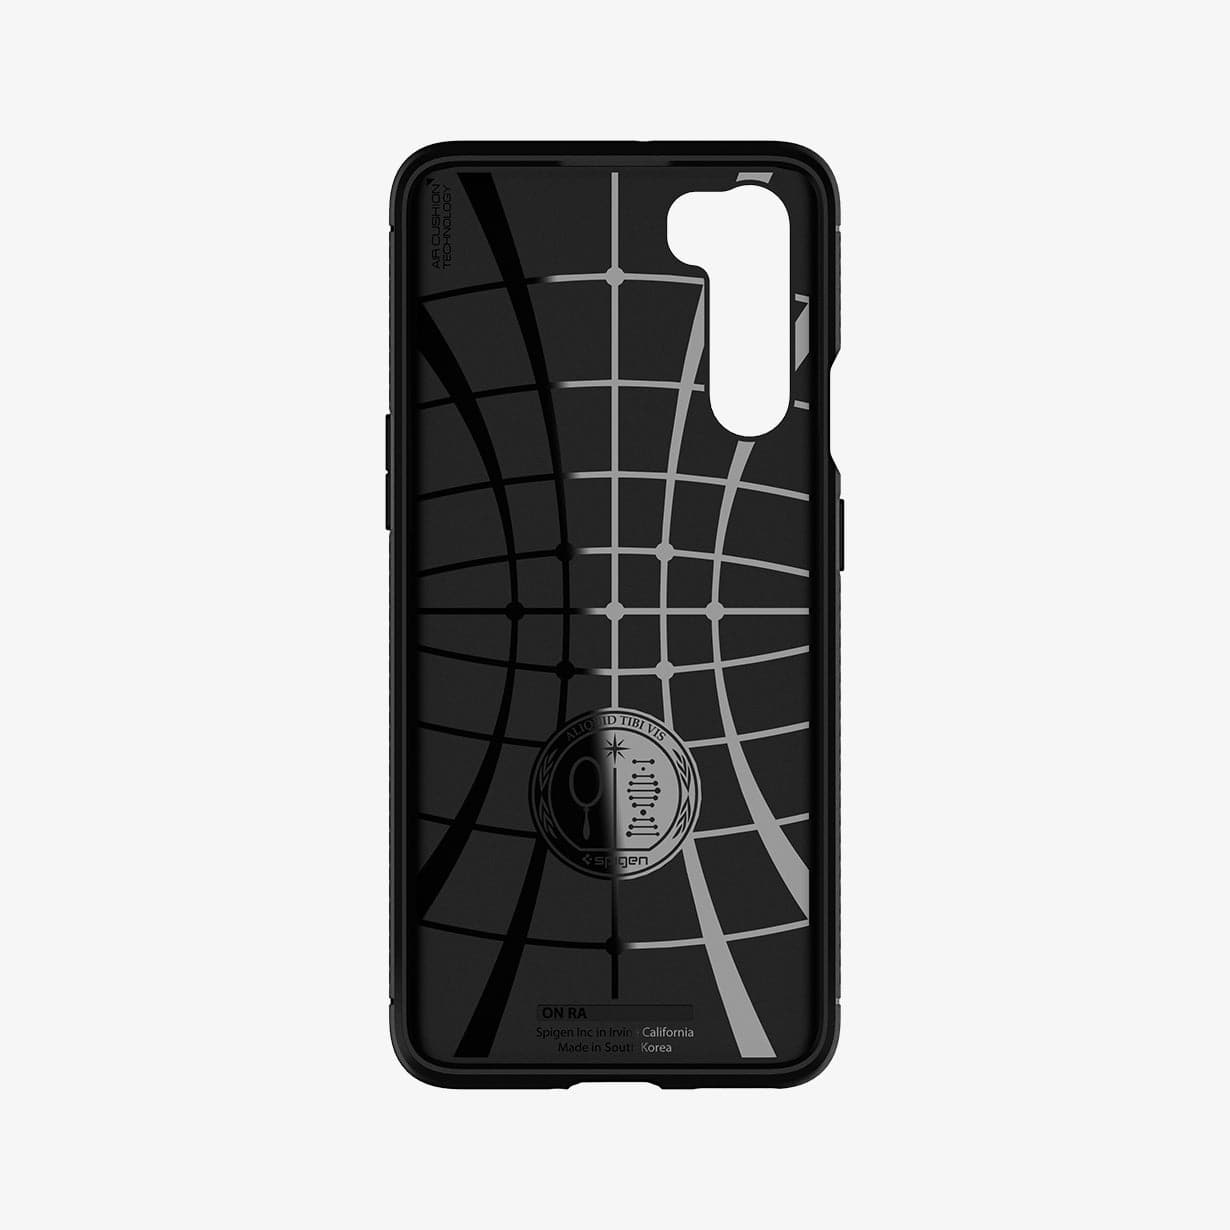 ACS00990 - OnePlus Nord Rugged Armor Case in Matte Black showing the inner case with spider web pattern